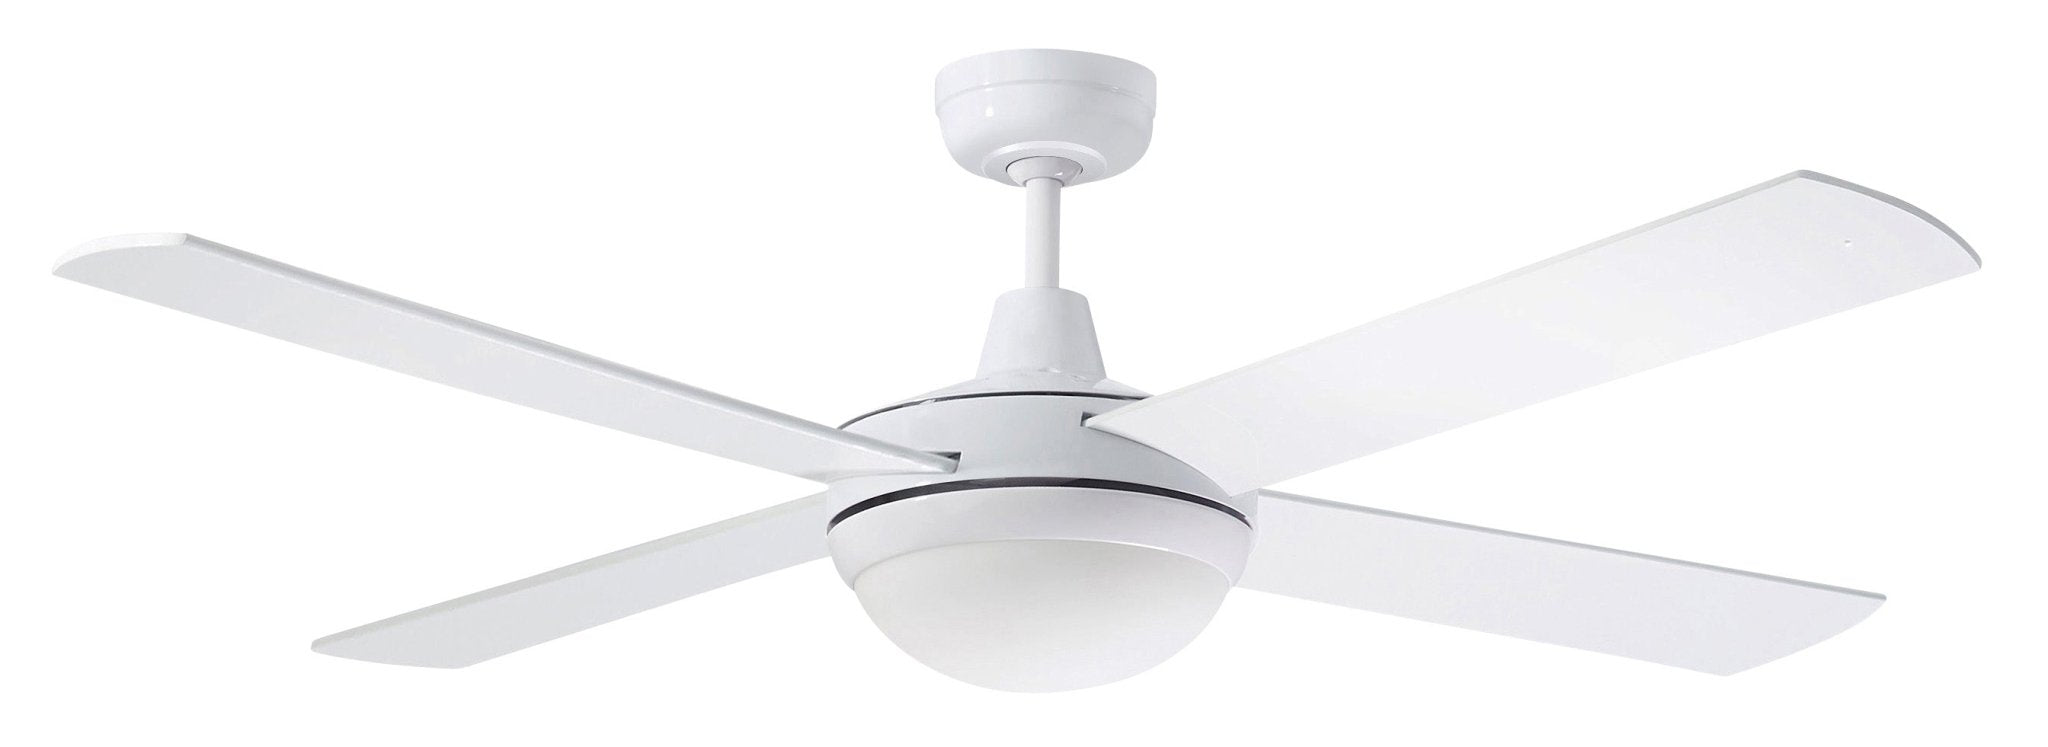 52" Lifestyle AC Ceiling Fan In White - Mases LightingMartec